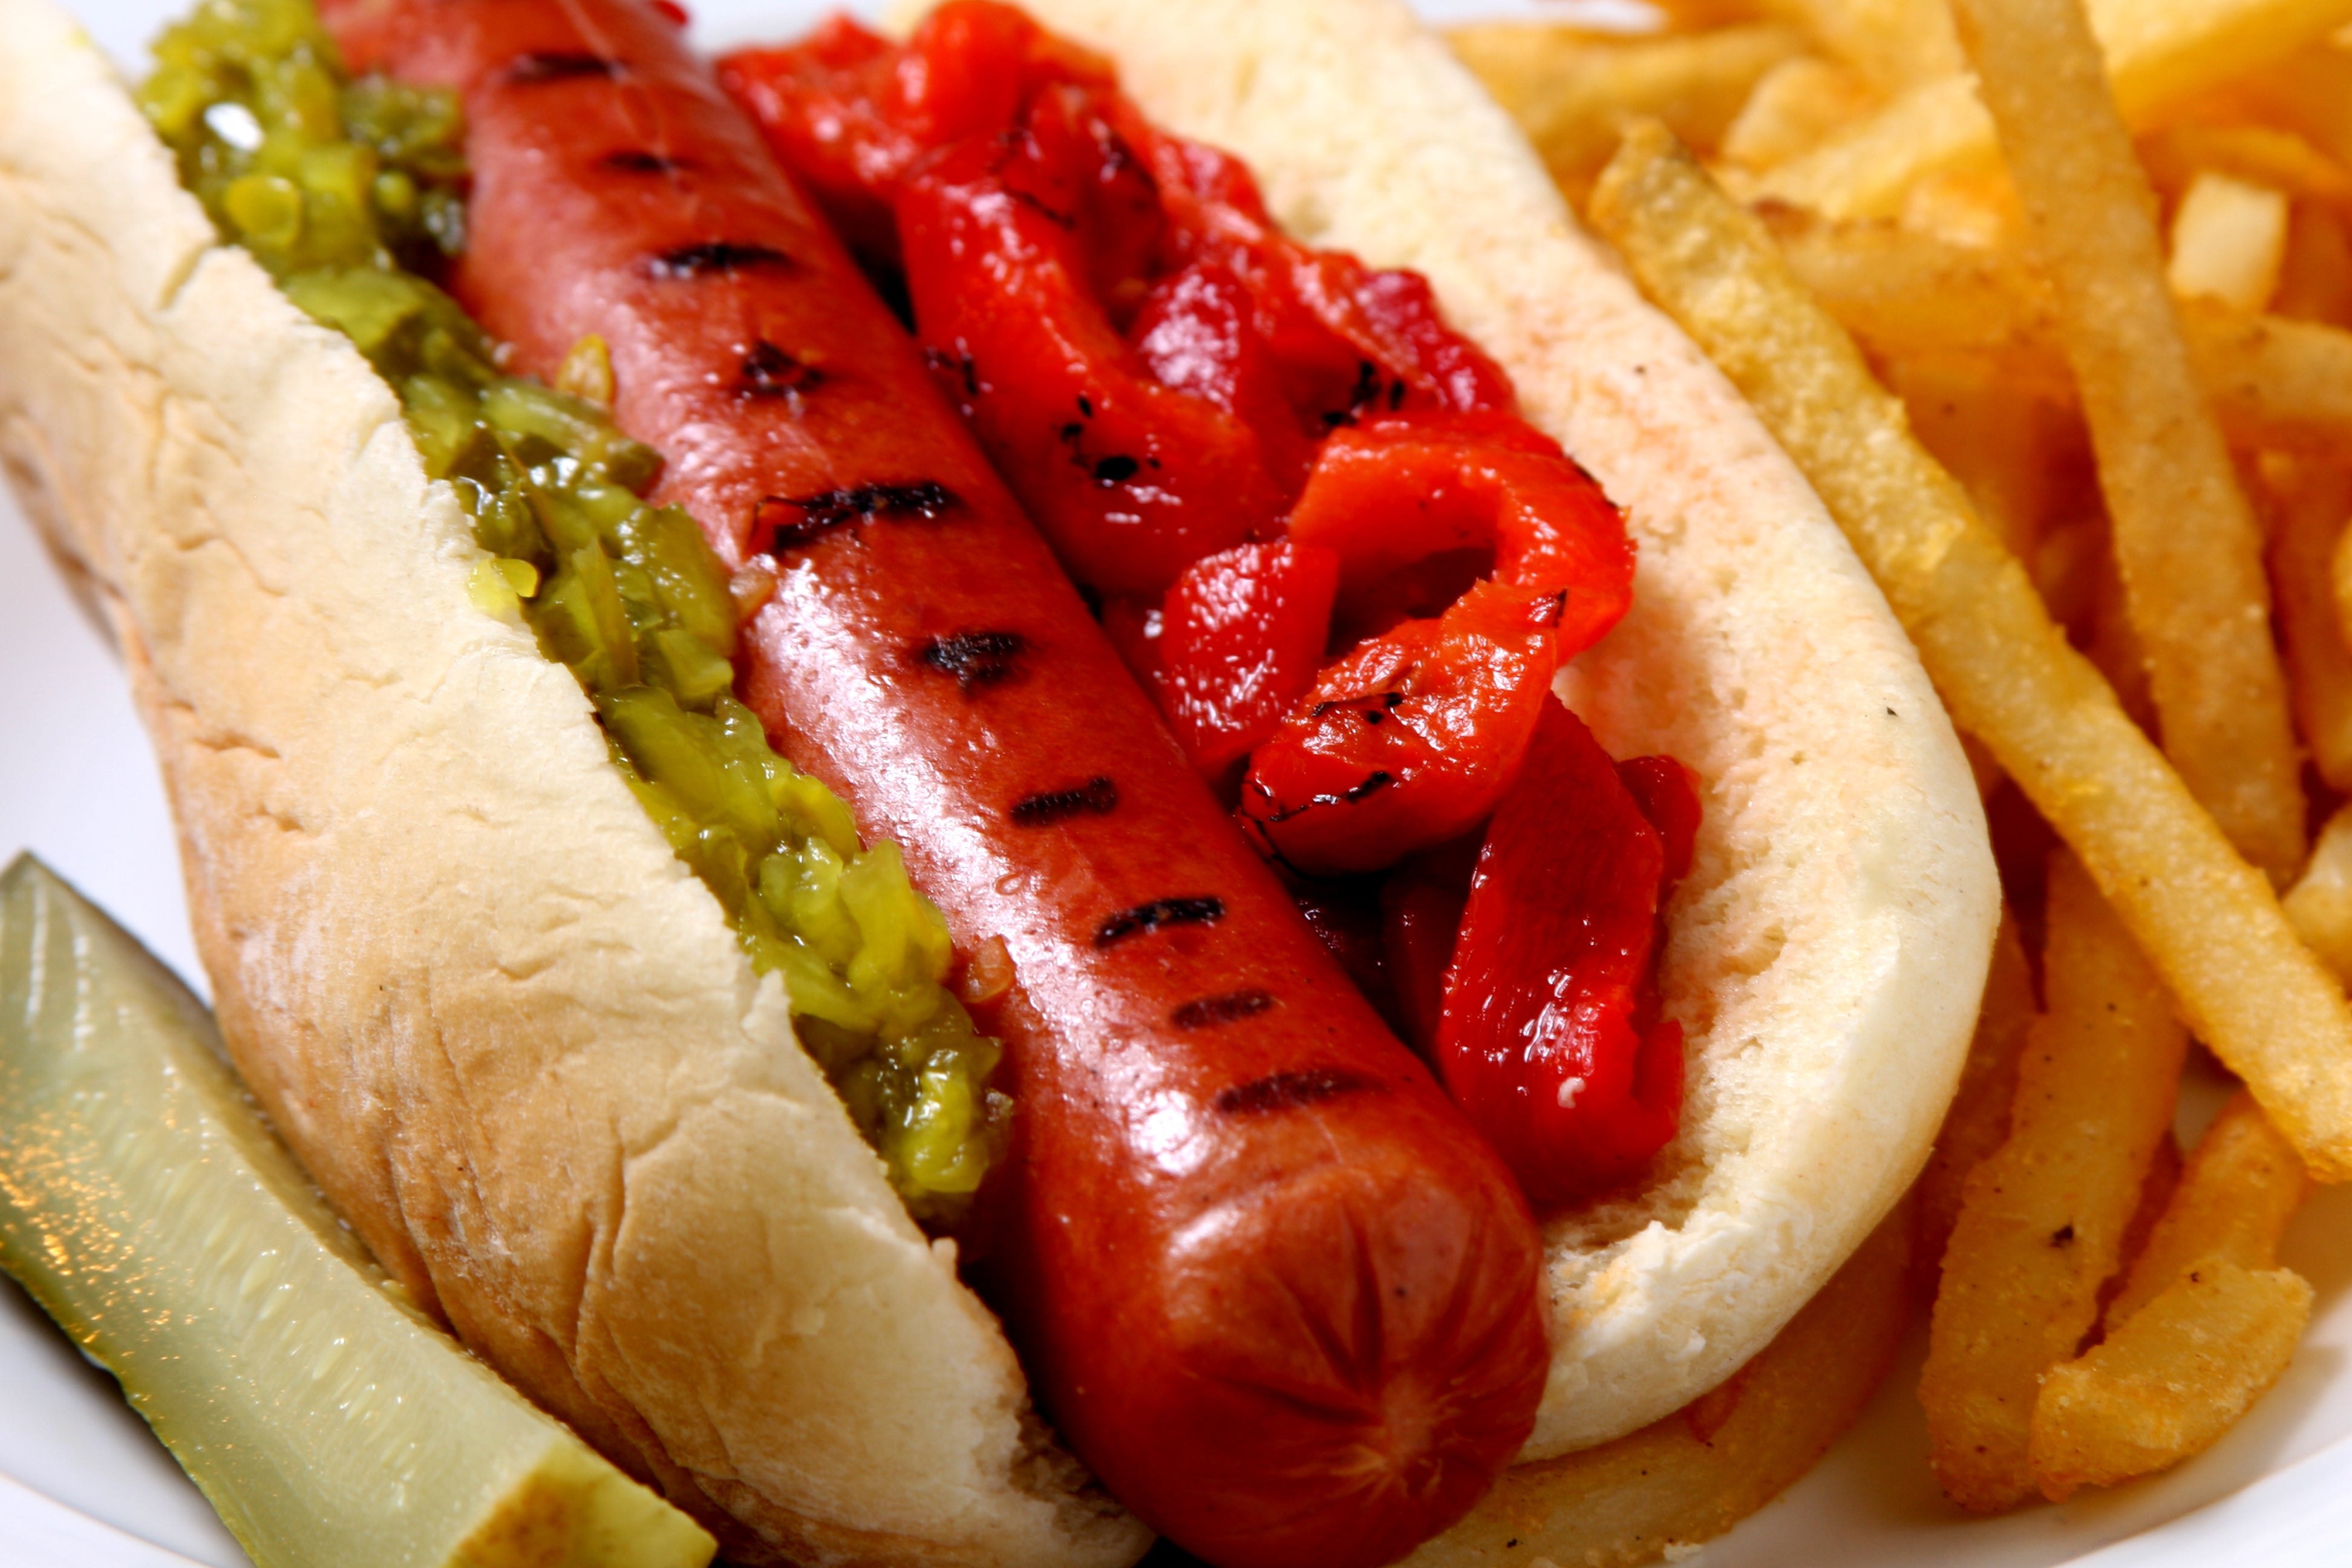 Gallery: Hot Dogs